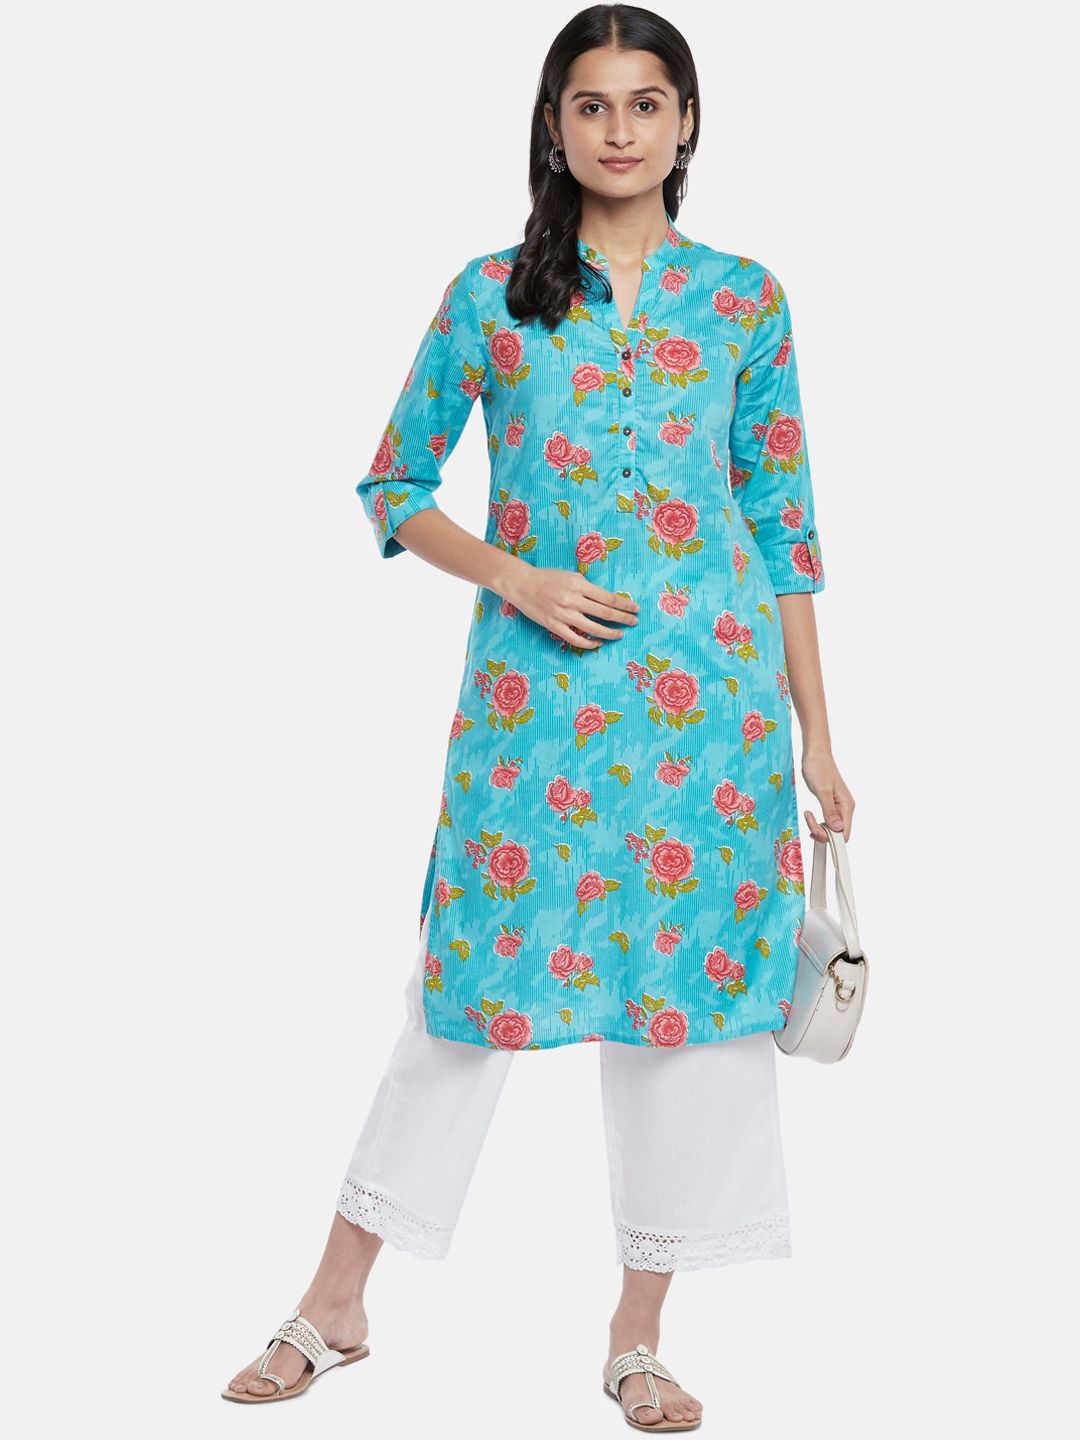 RANGMANCH BY PANTALOONS Women Blue & Pink Floral Printed Cotton Straight Kurta Price in India